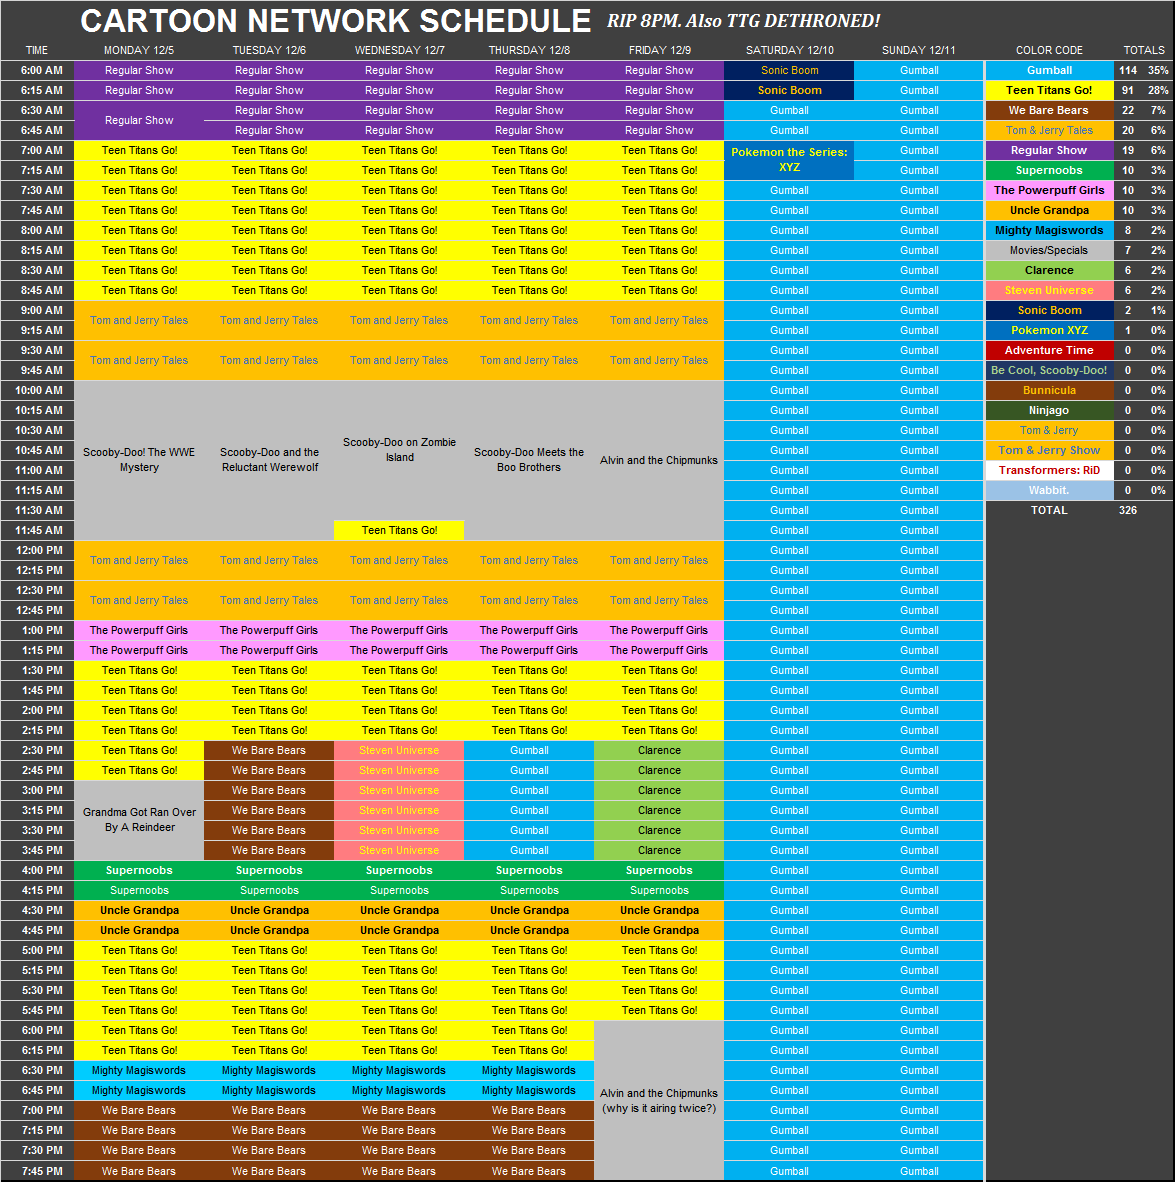 BoogsterSU2, This was the Cartoon Network schedule from...